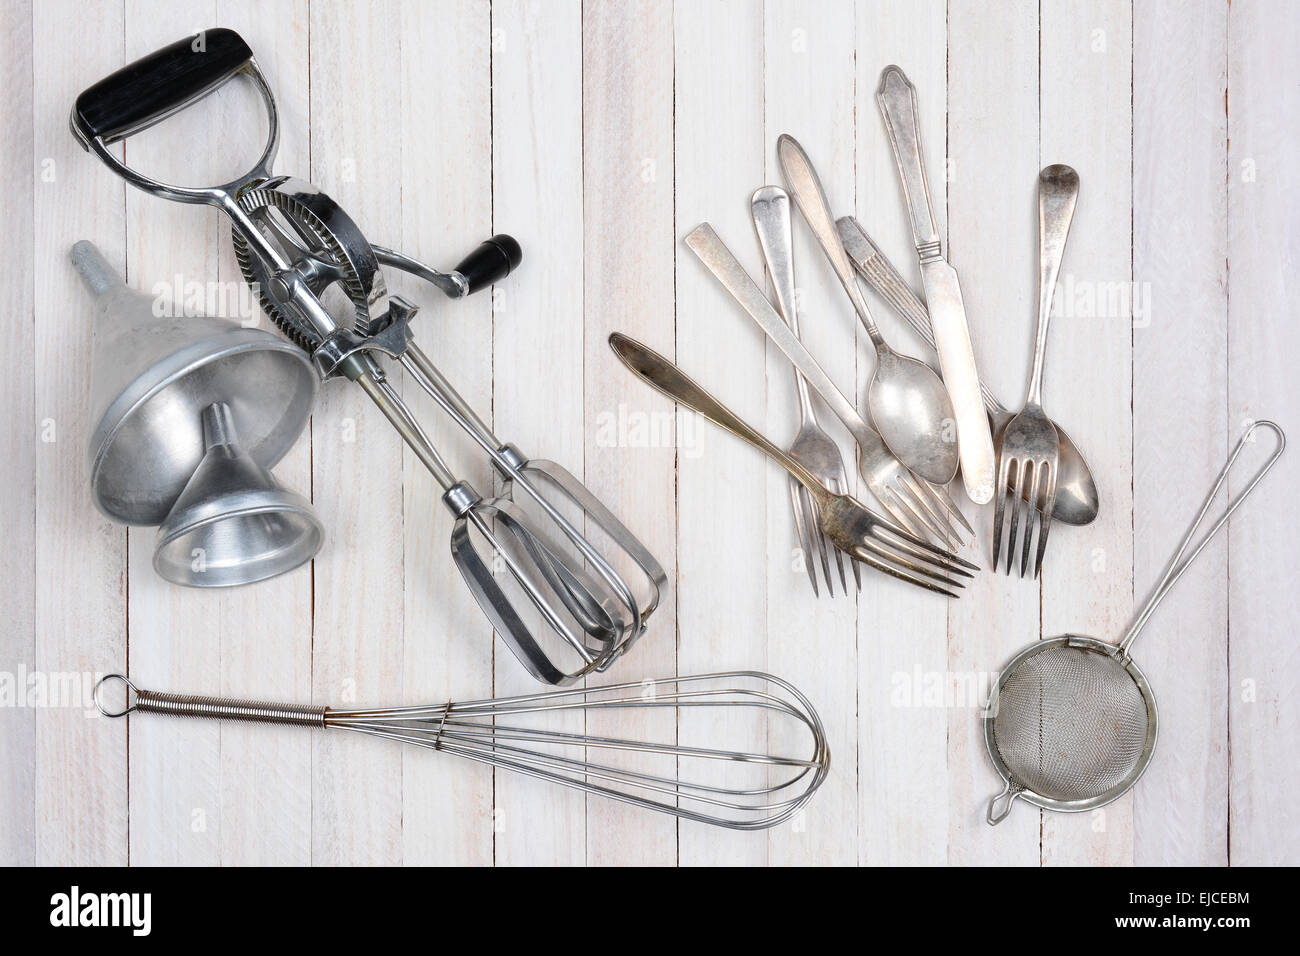 Overhead shot of a group of old kitchen utensils on a rustic wood kitchen table. Stock Photo